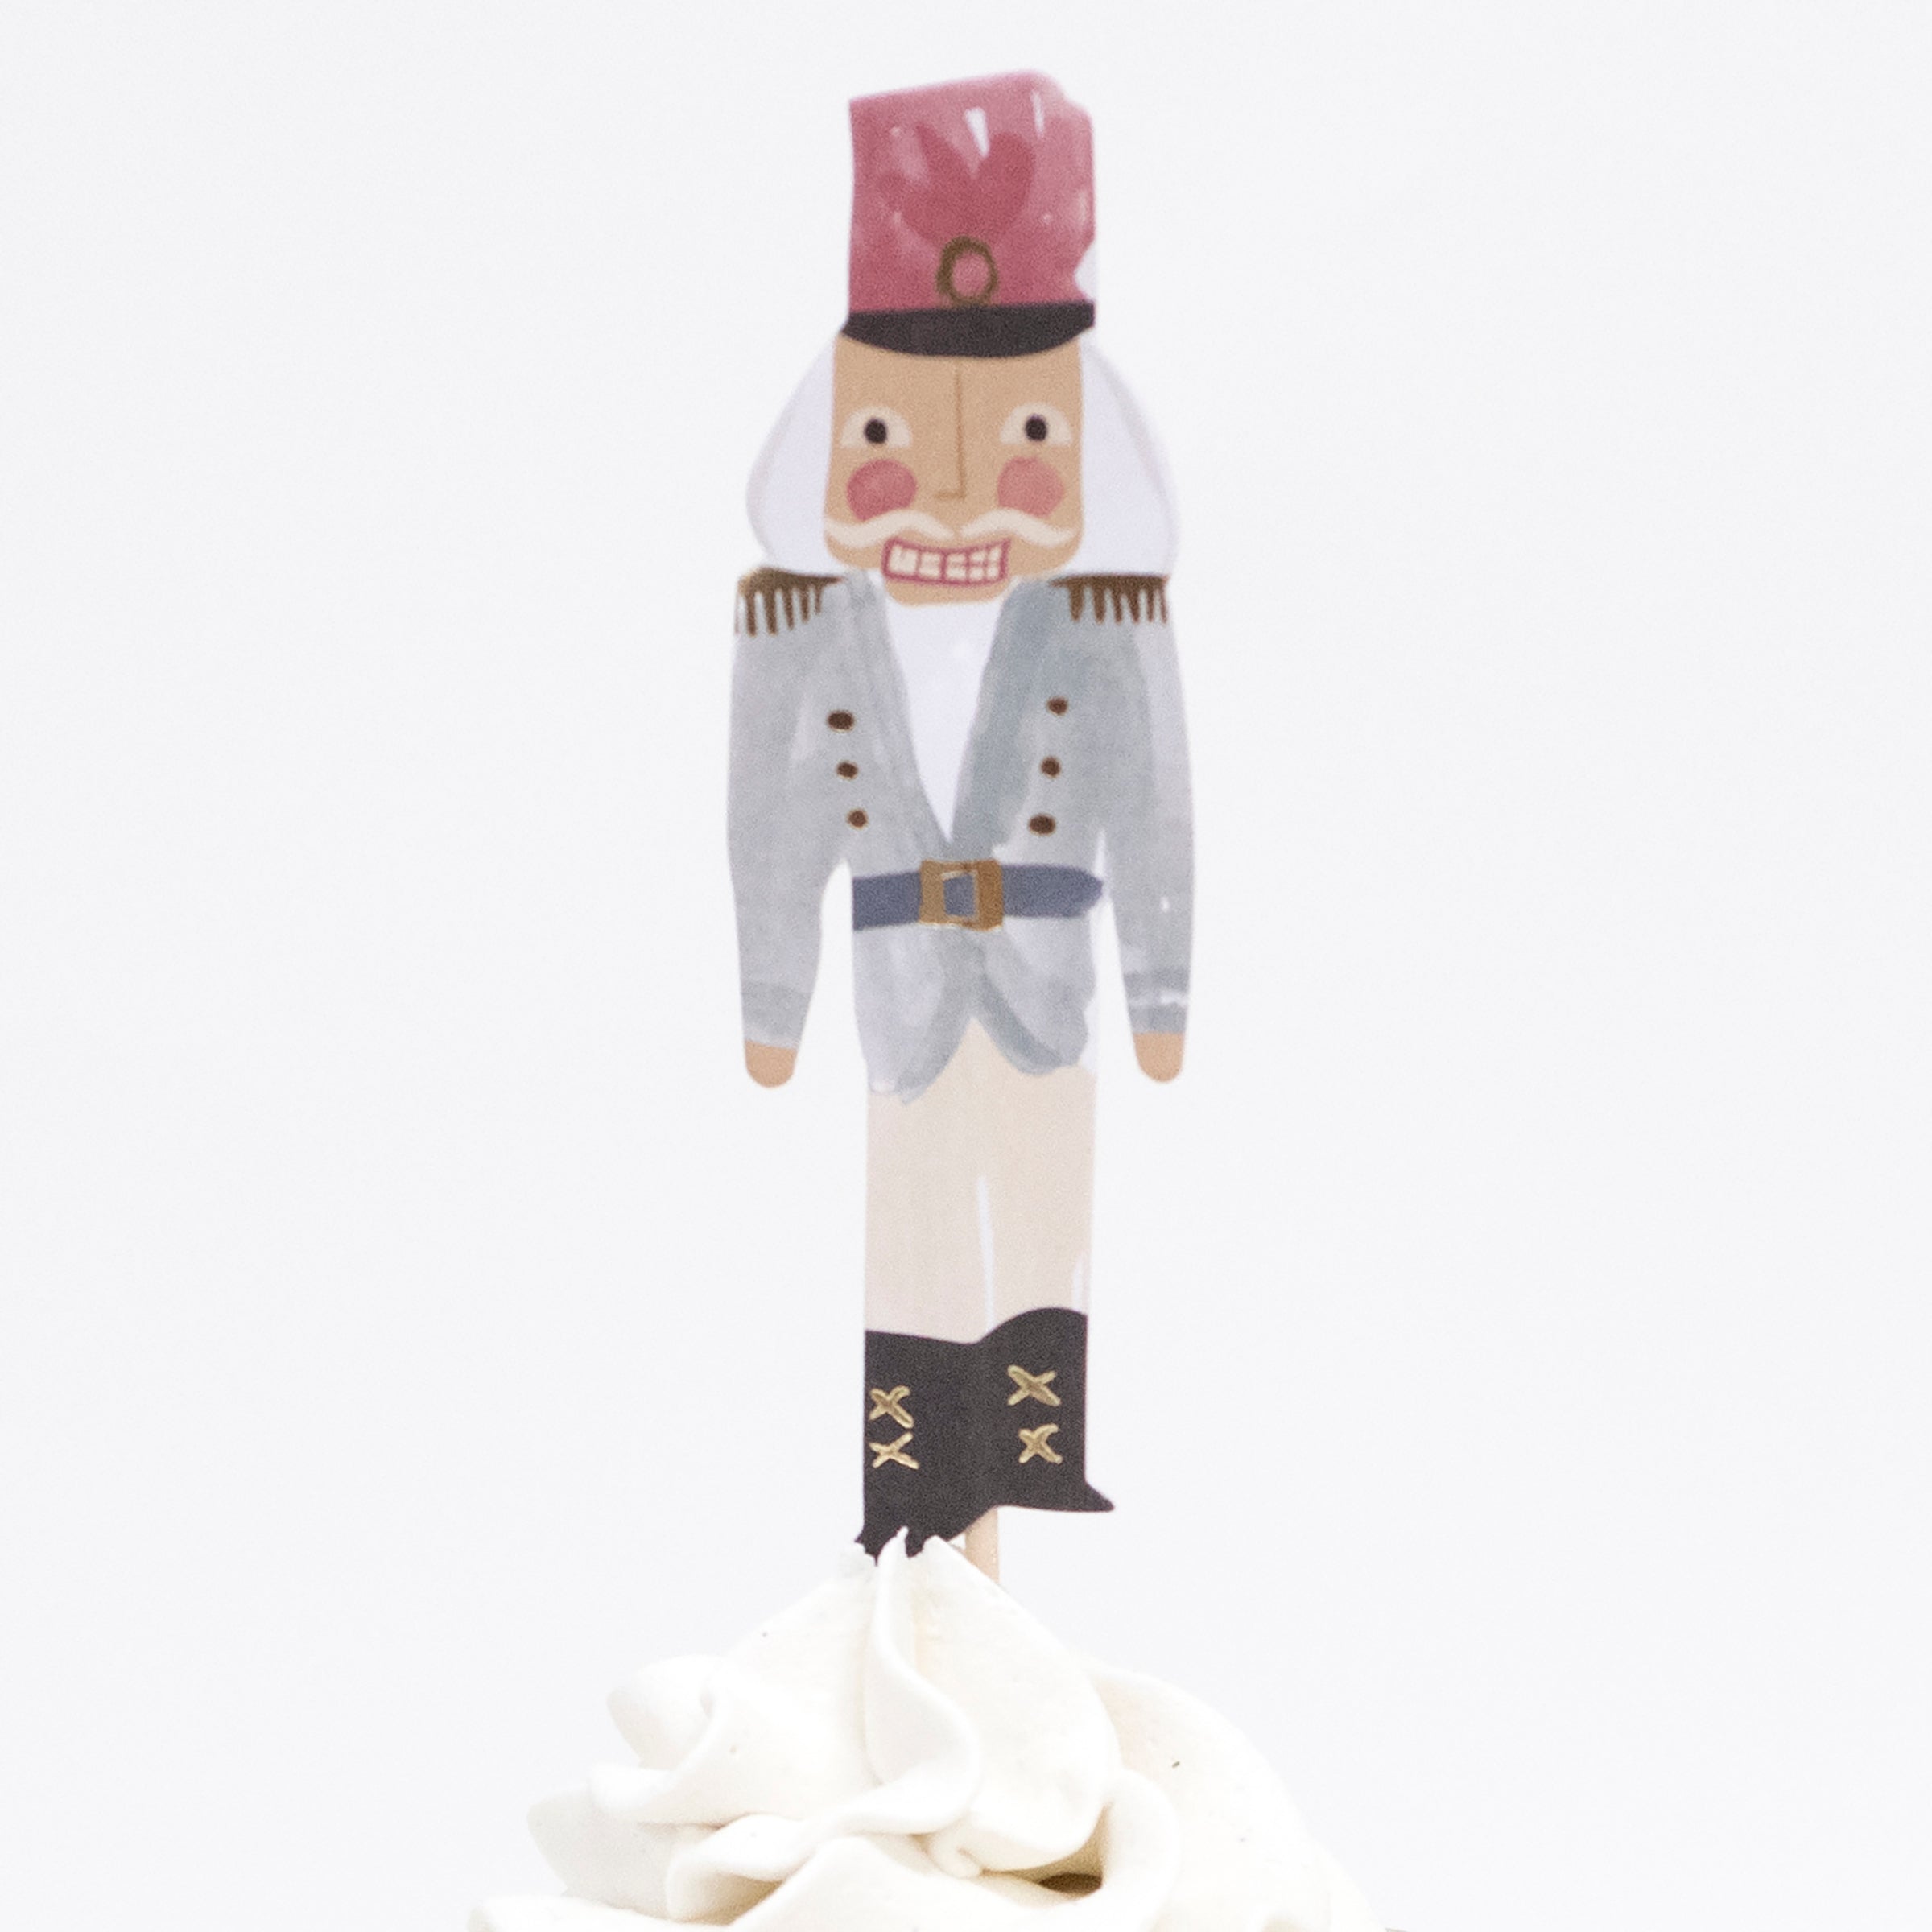 Make the most wonderful Christmas cupcakes with our special Nutcracker Christmas kit.